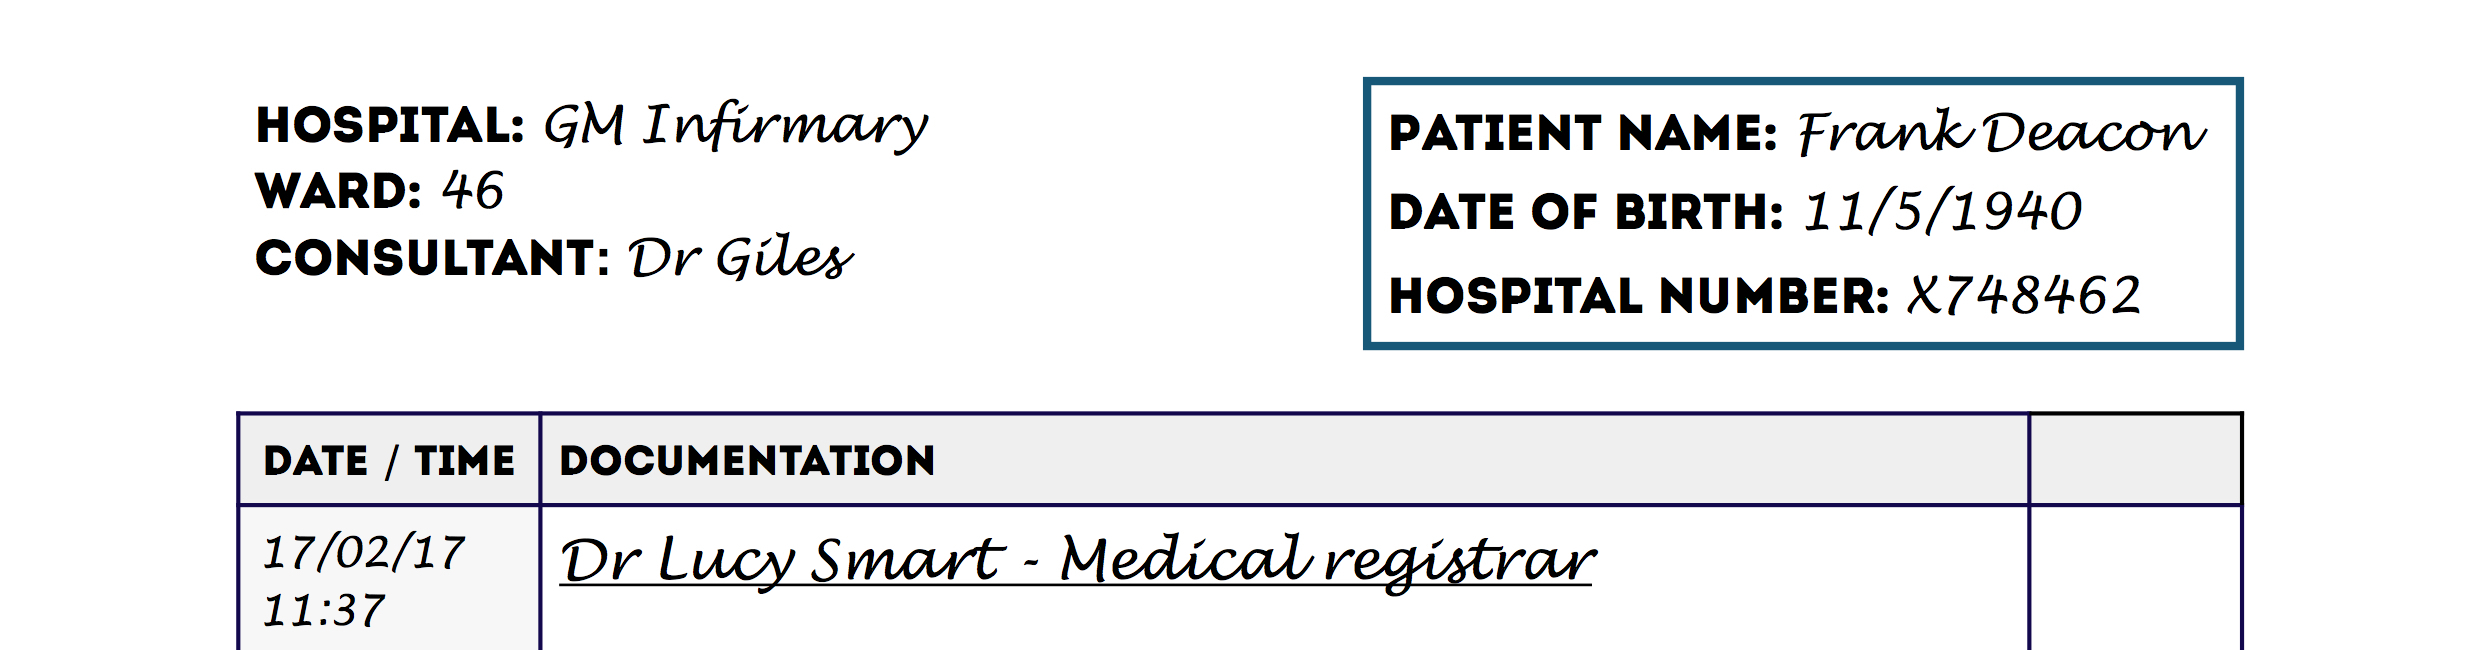 How To Document Death Confirmation | Geeky Medics For Medical Death Note Template